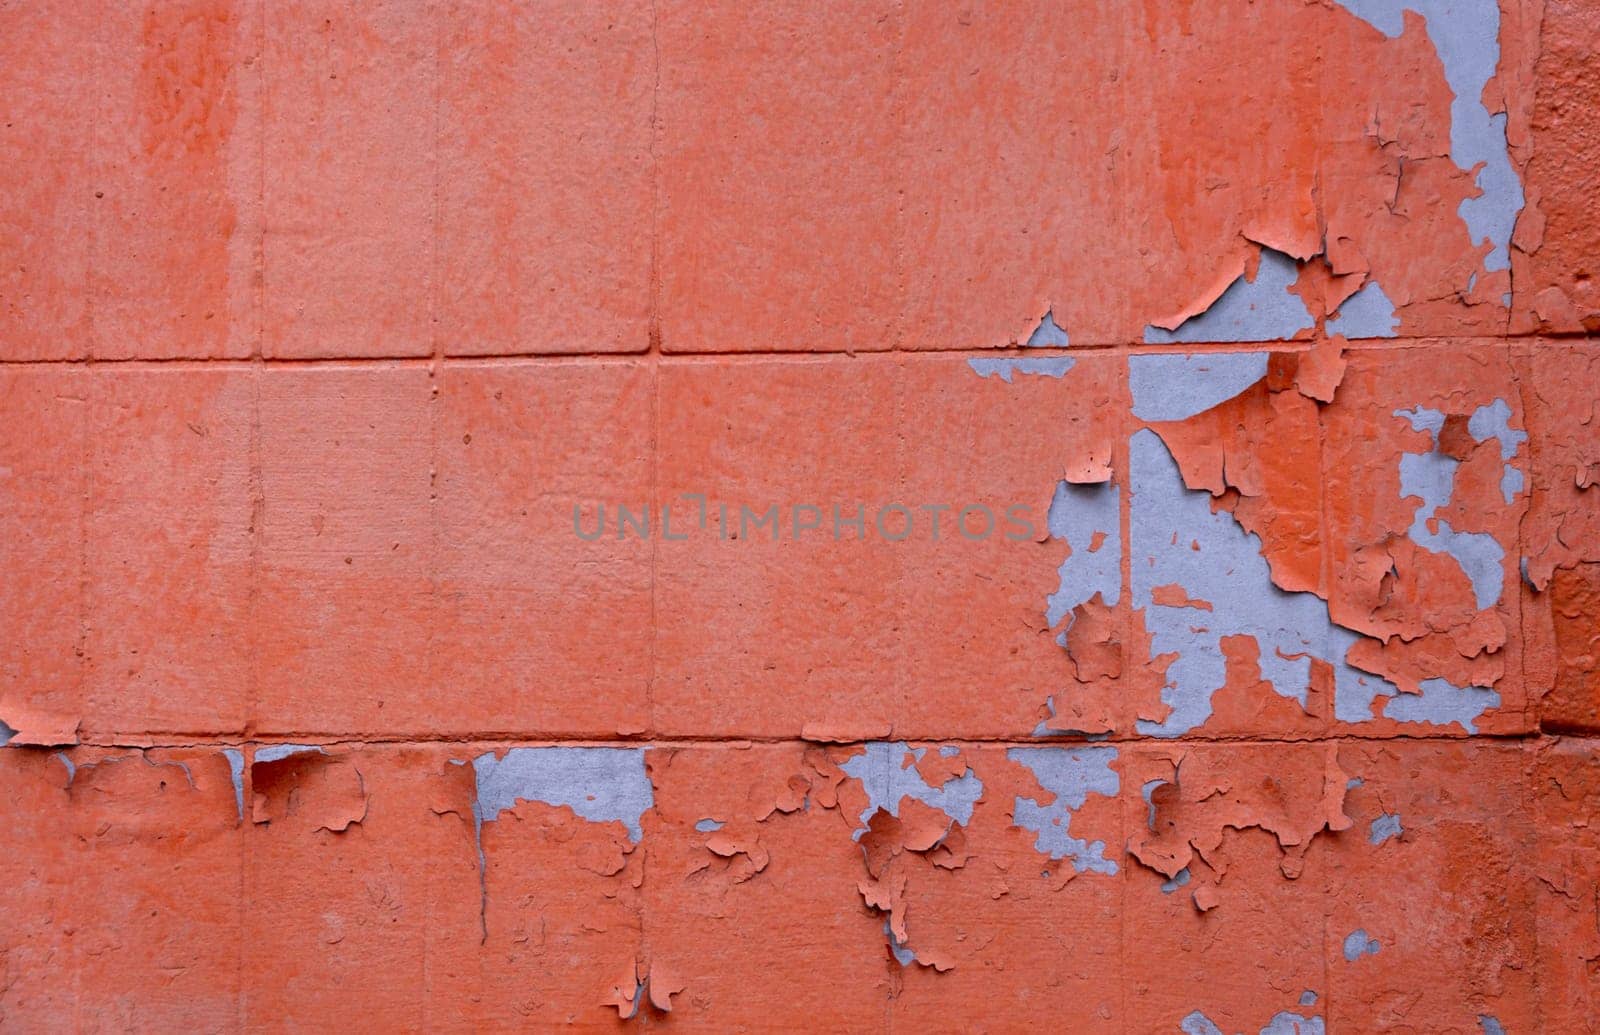 Grunge Concrete Wall Texture peeling paint, old cracked wall peach or pink colored closeup. old red brick wall, pattern, natural material